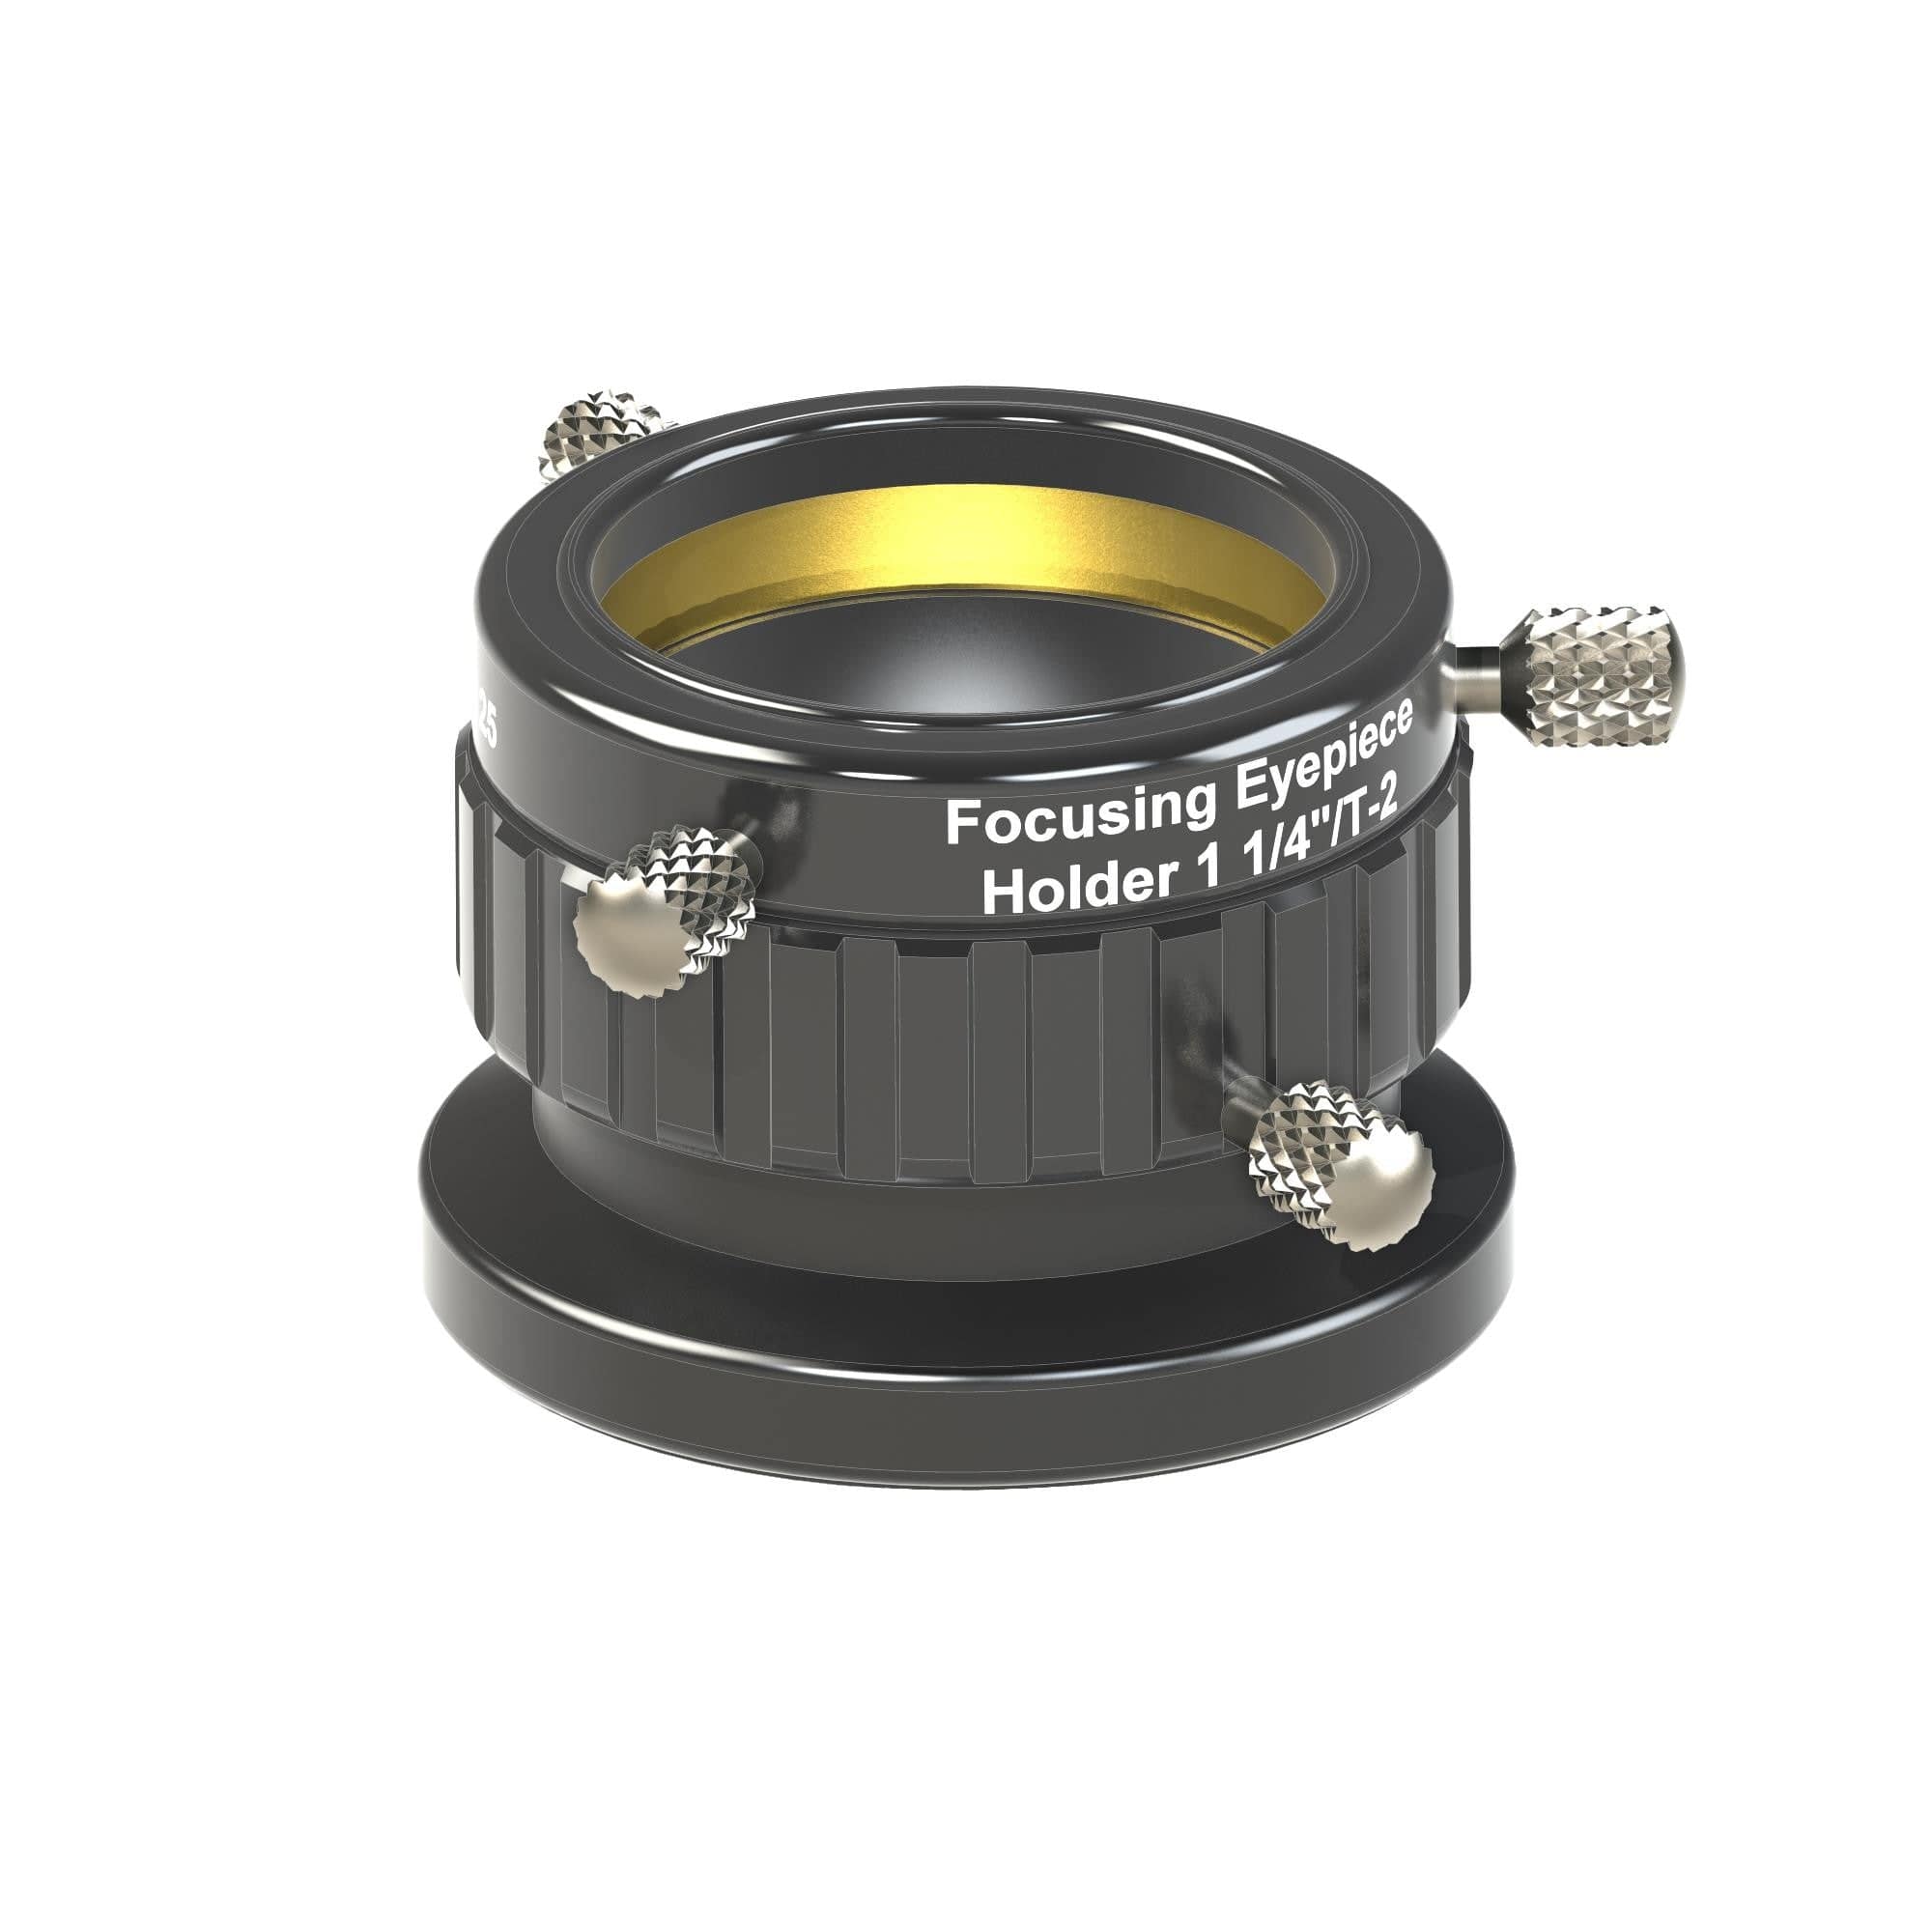 Baader Planetarium Accessory Baader 1¼" / T-2 Focusing Eyepiece Clamp, w/ dual clampscrews and compression ring - 2458125